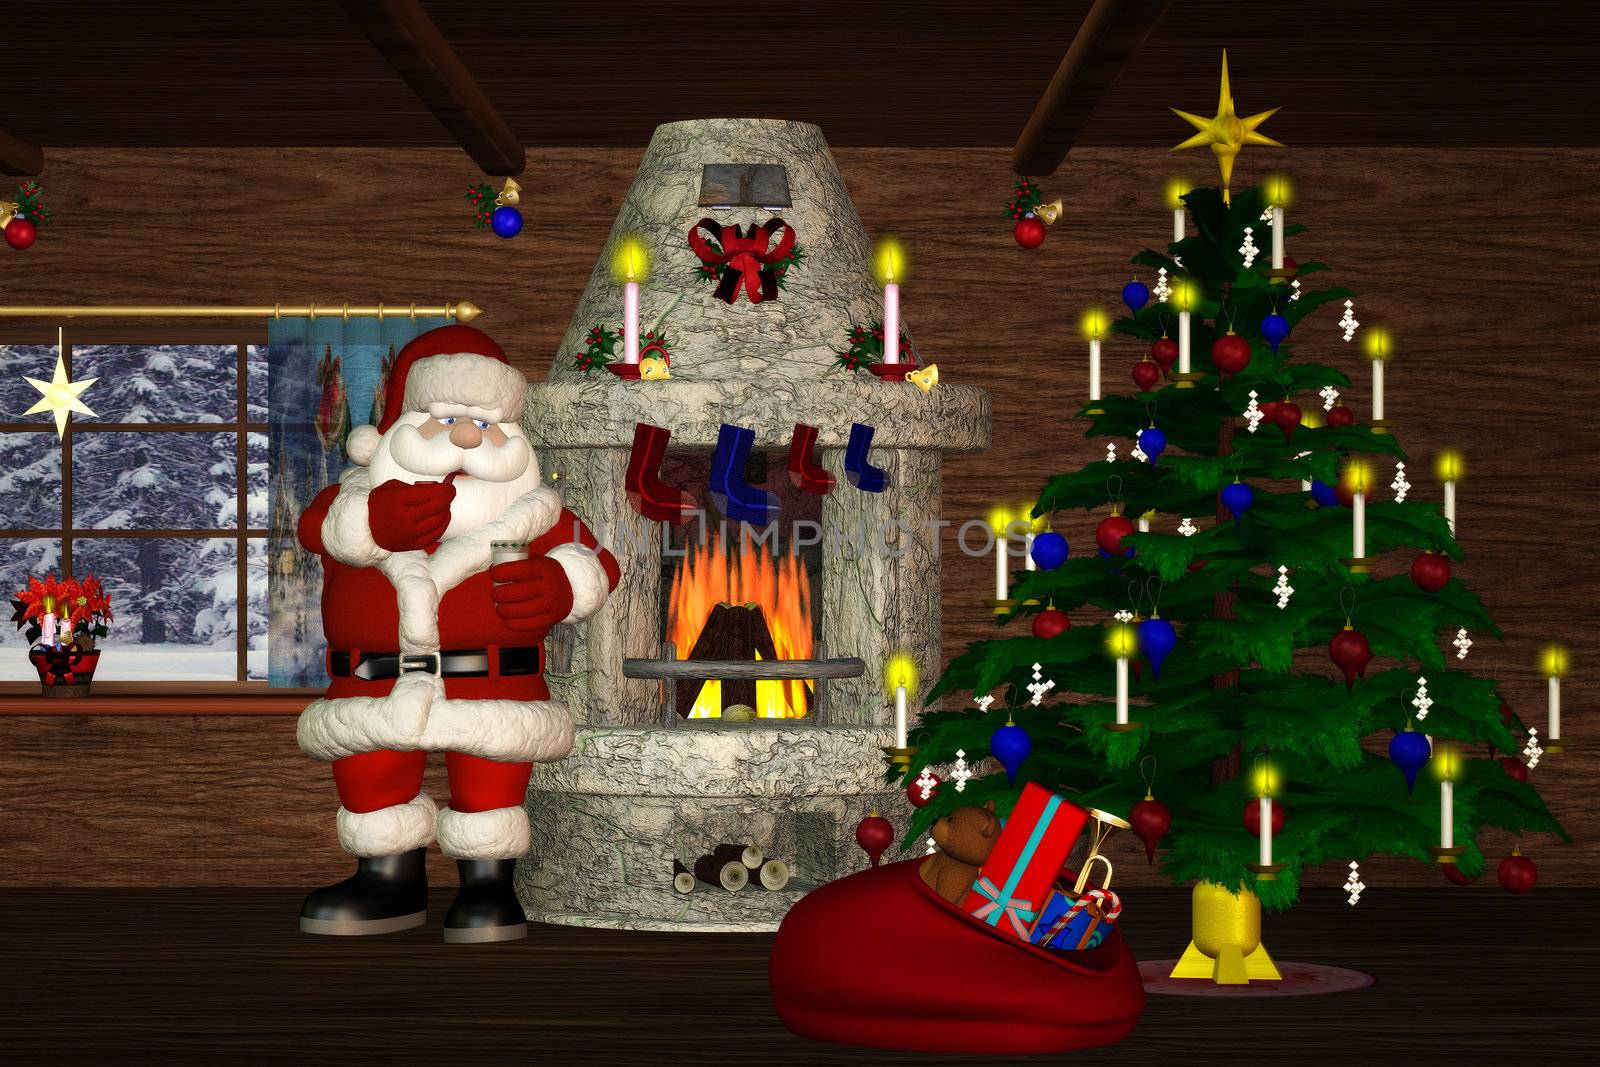 Santa Claus is smoking a pipe in front of the fireplace